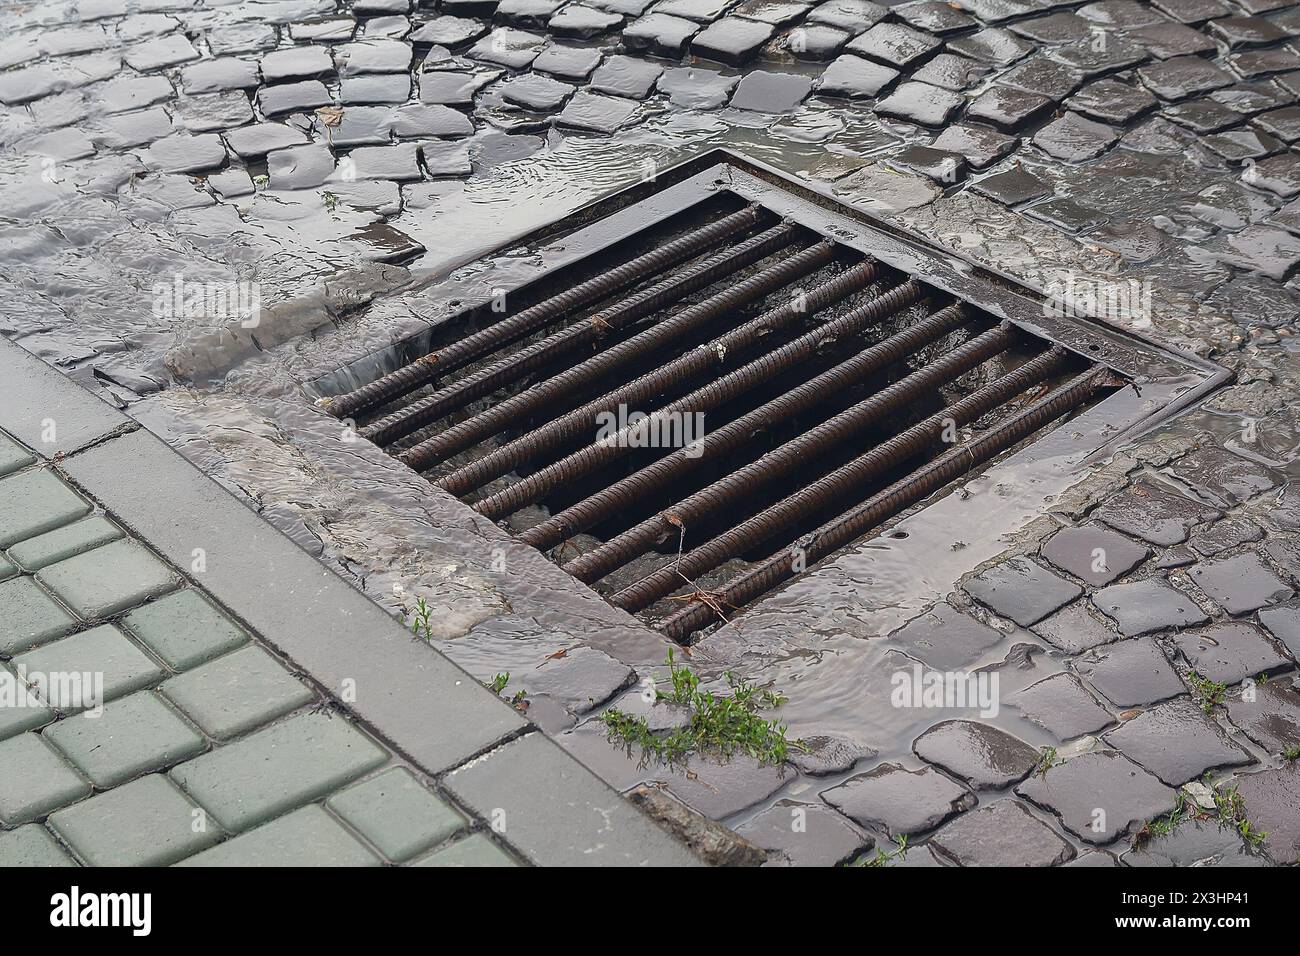 Water flows down through the manhole cover on a runny day Stock Photo